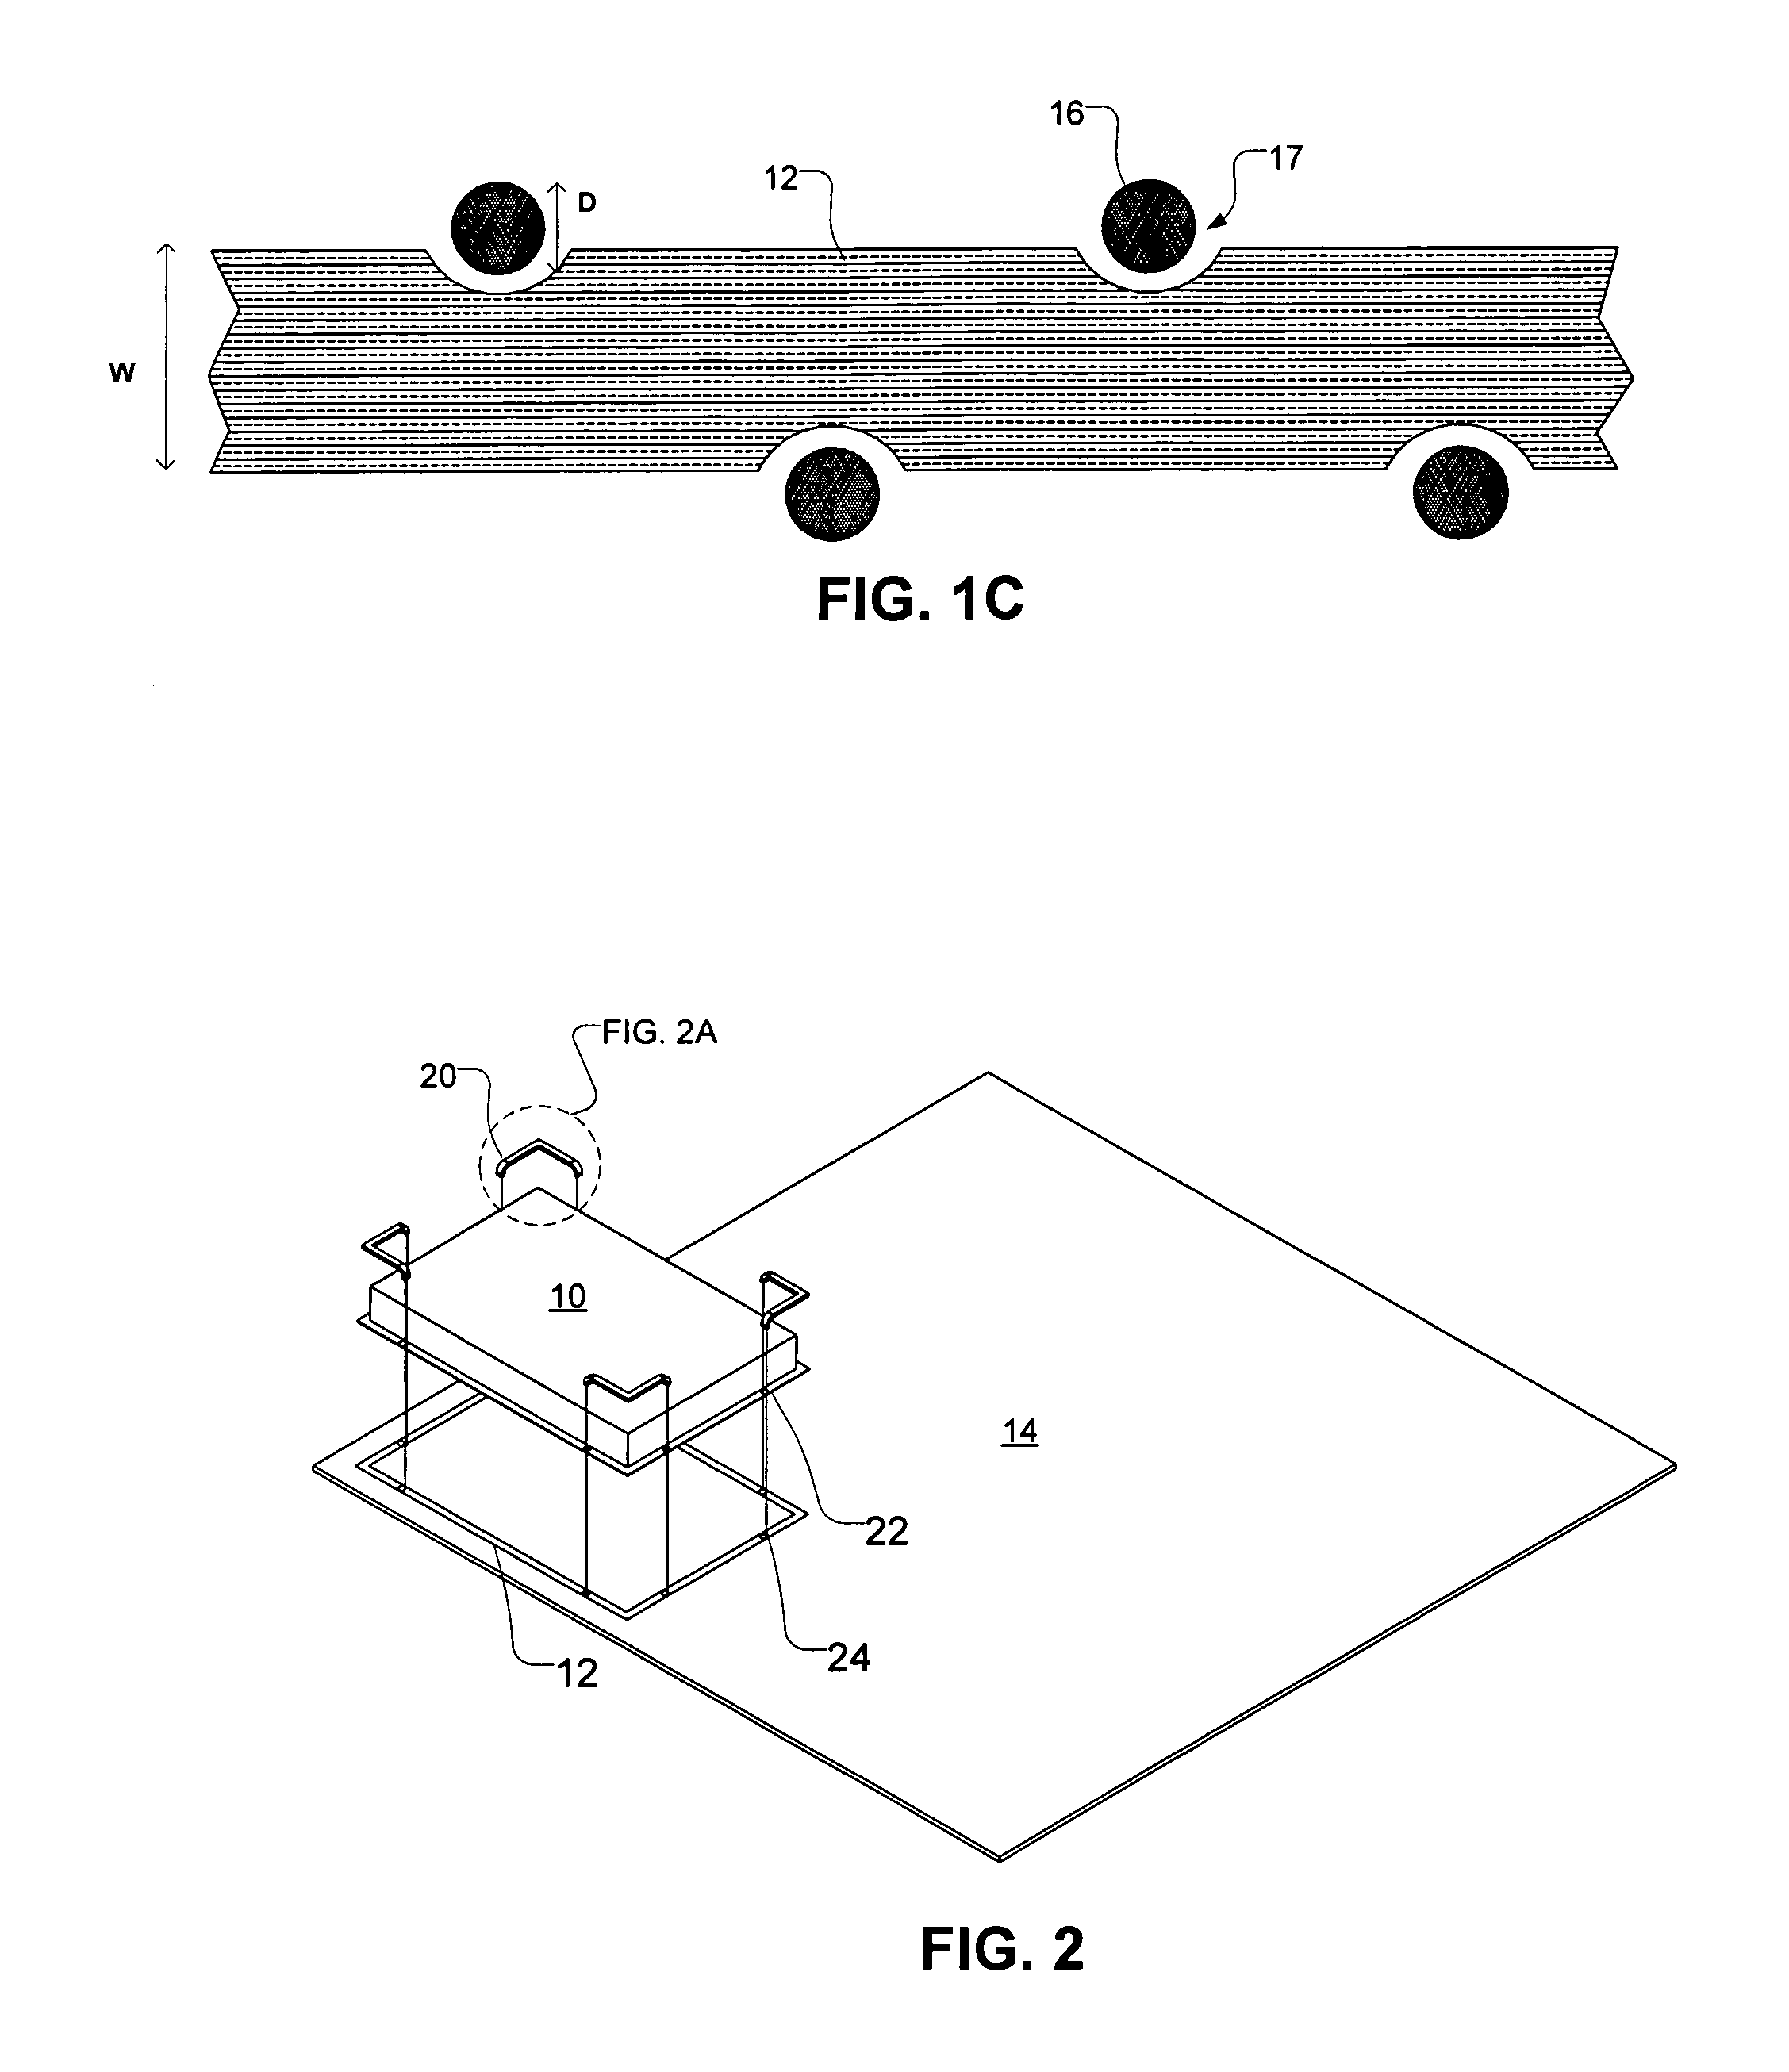 Methods and devices for connecting and grounding an EMI shield to a printed circuit board